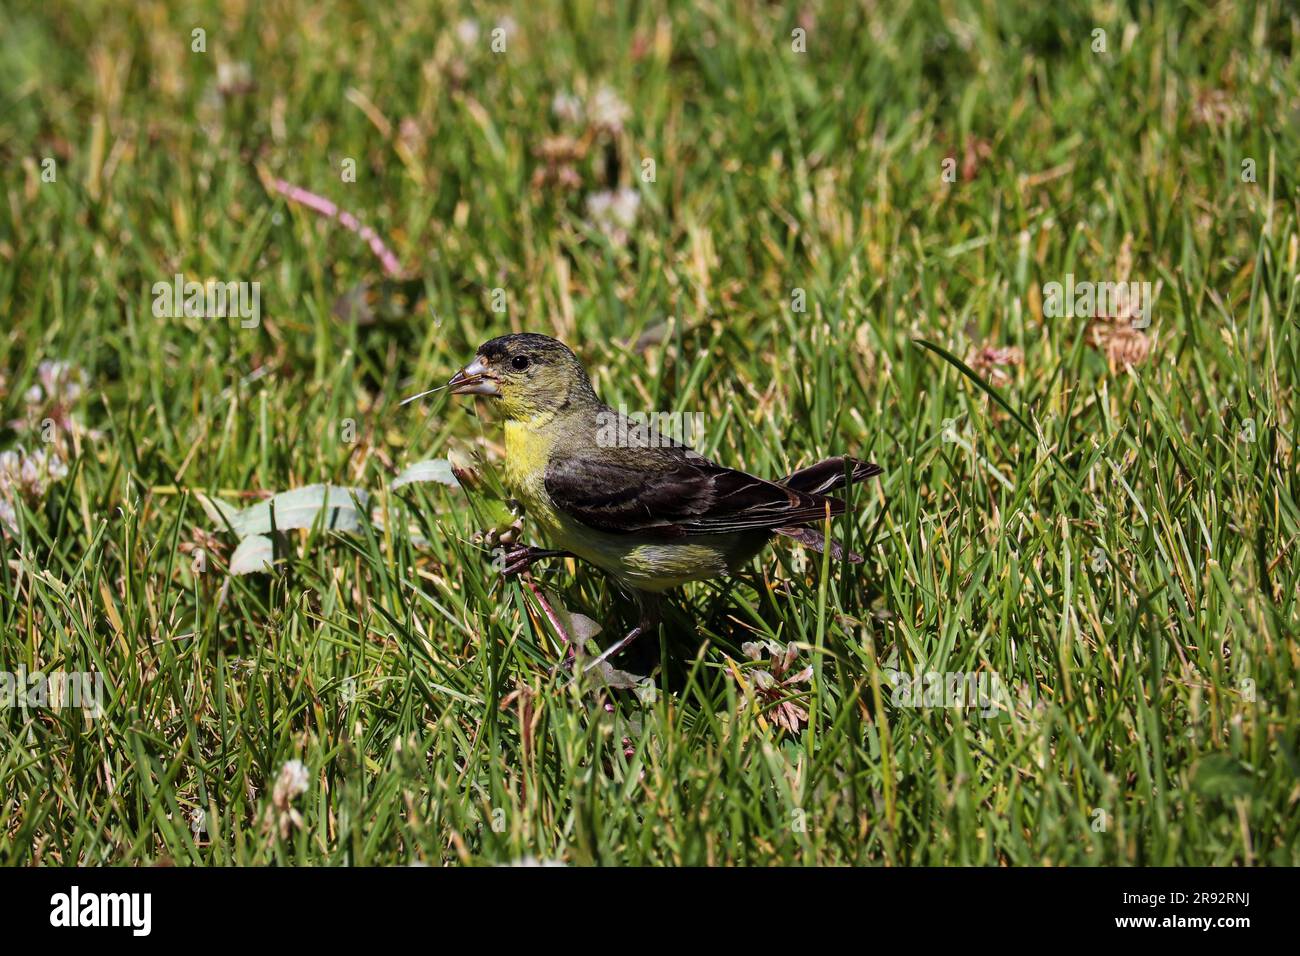 Lessar goldfinch or Carduelis psaltria feeding on dandelions at Green Valley Park in Payson. Arizona. Stock Photo